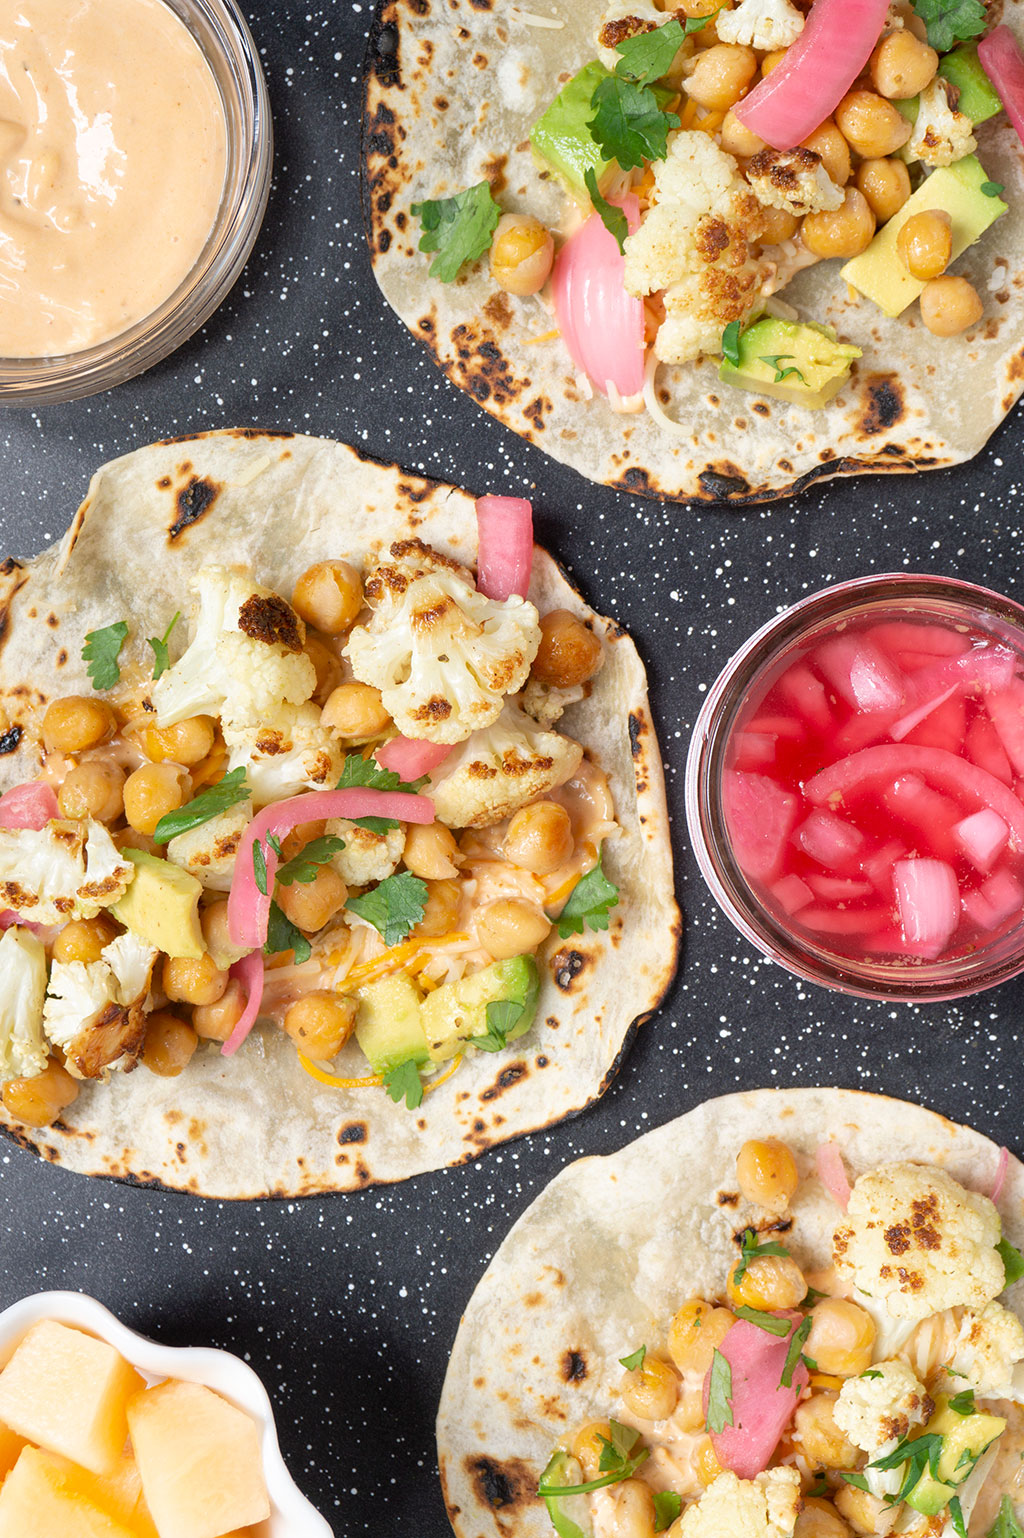 vertical image of cauliflower tacos on tray, bowl of fruit on side